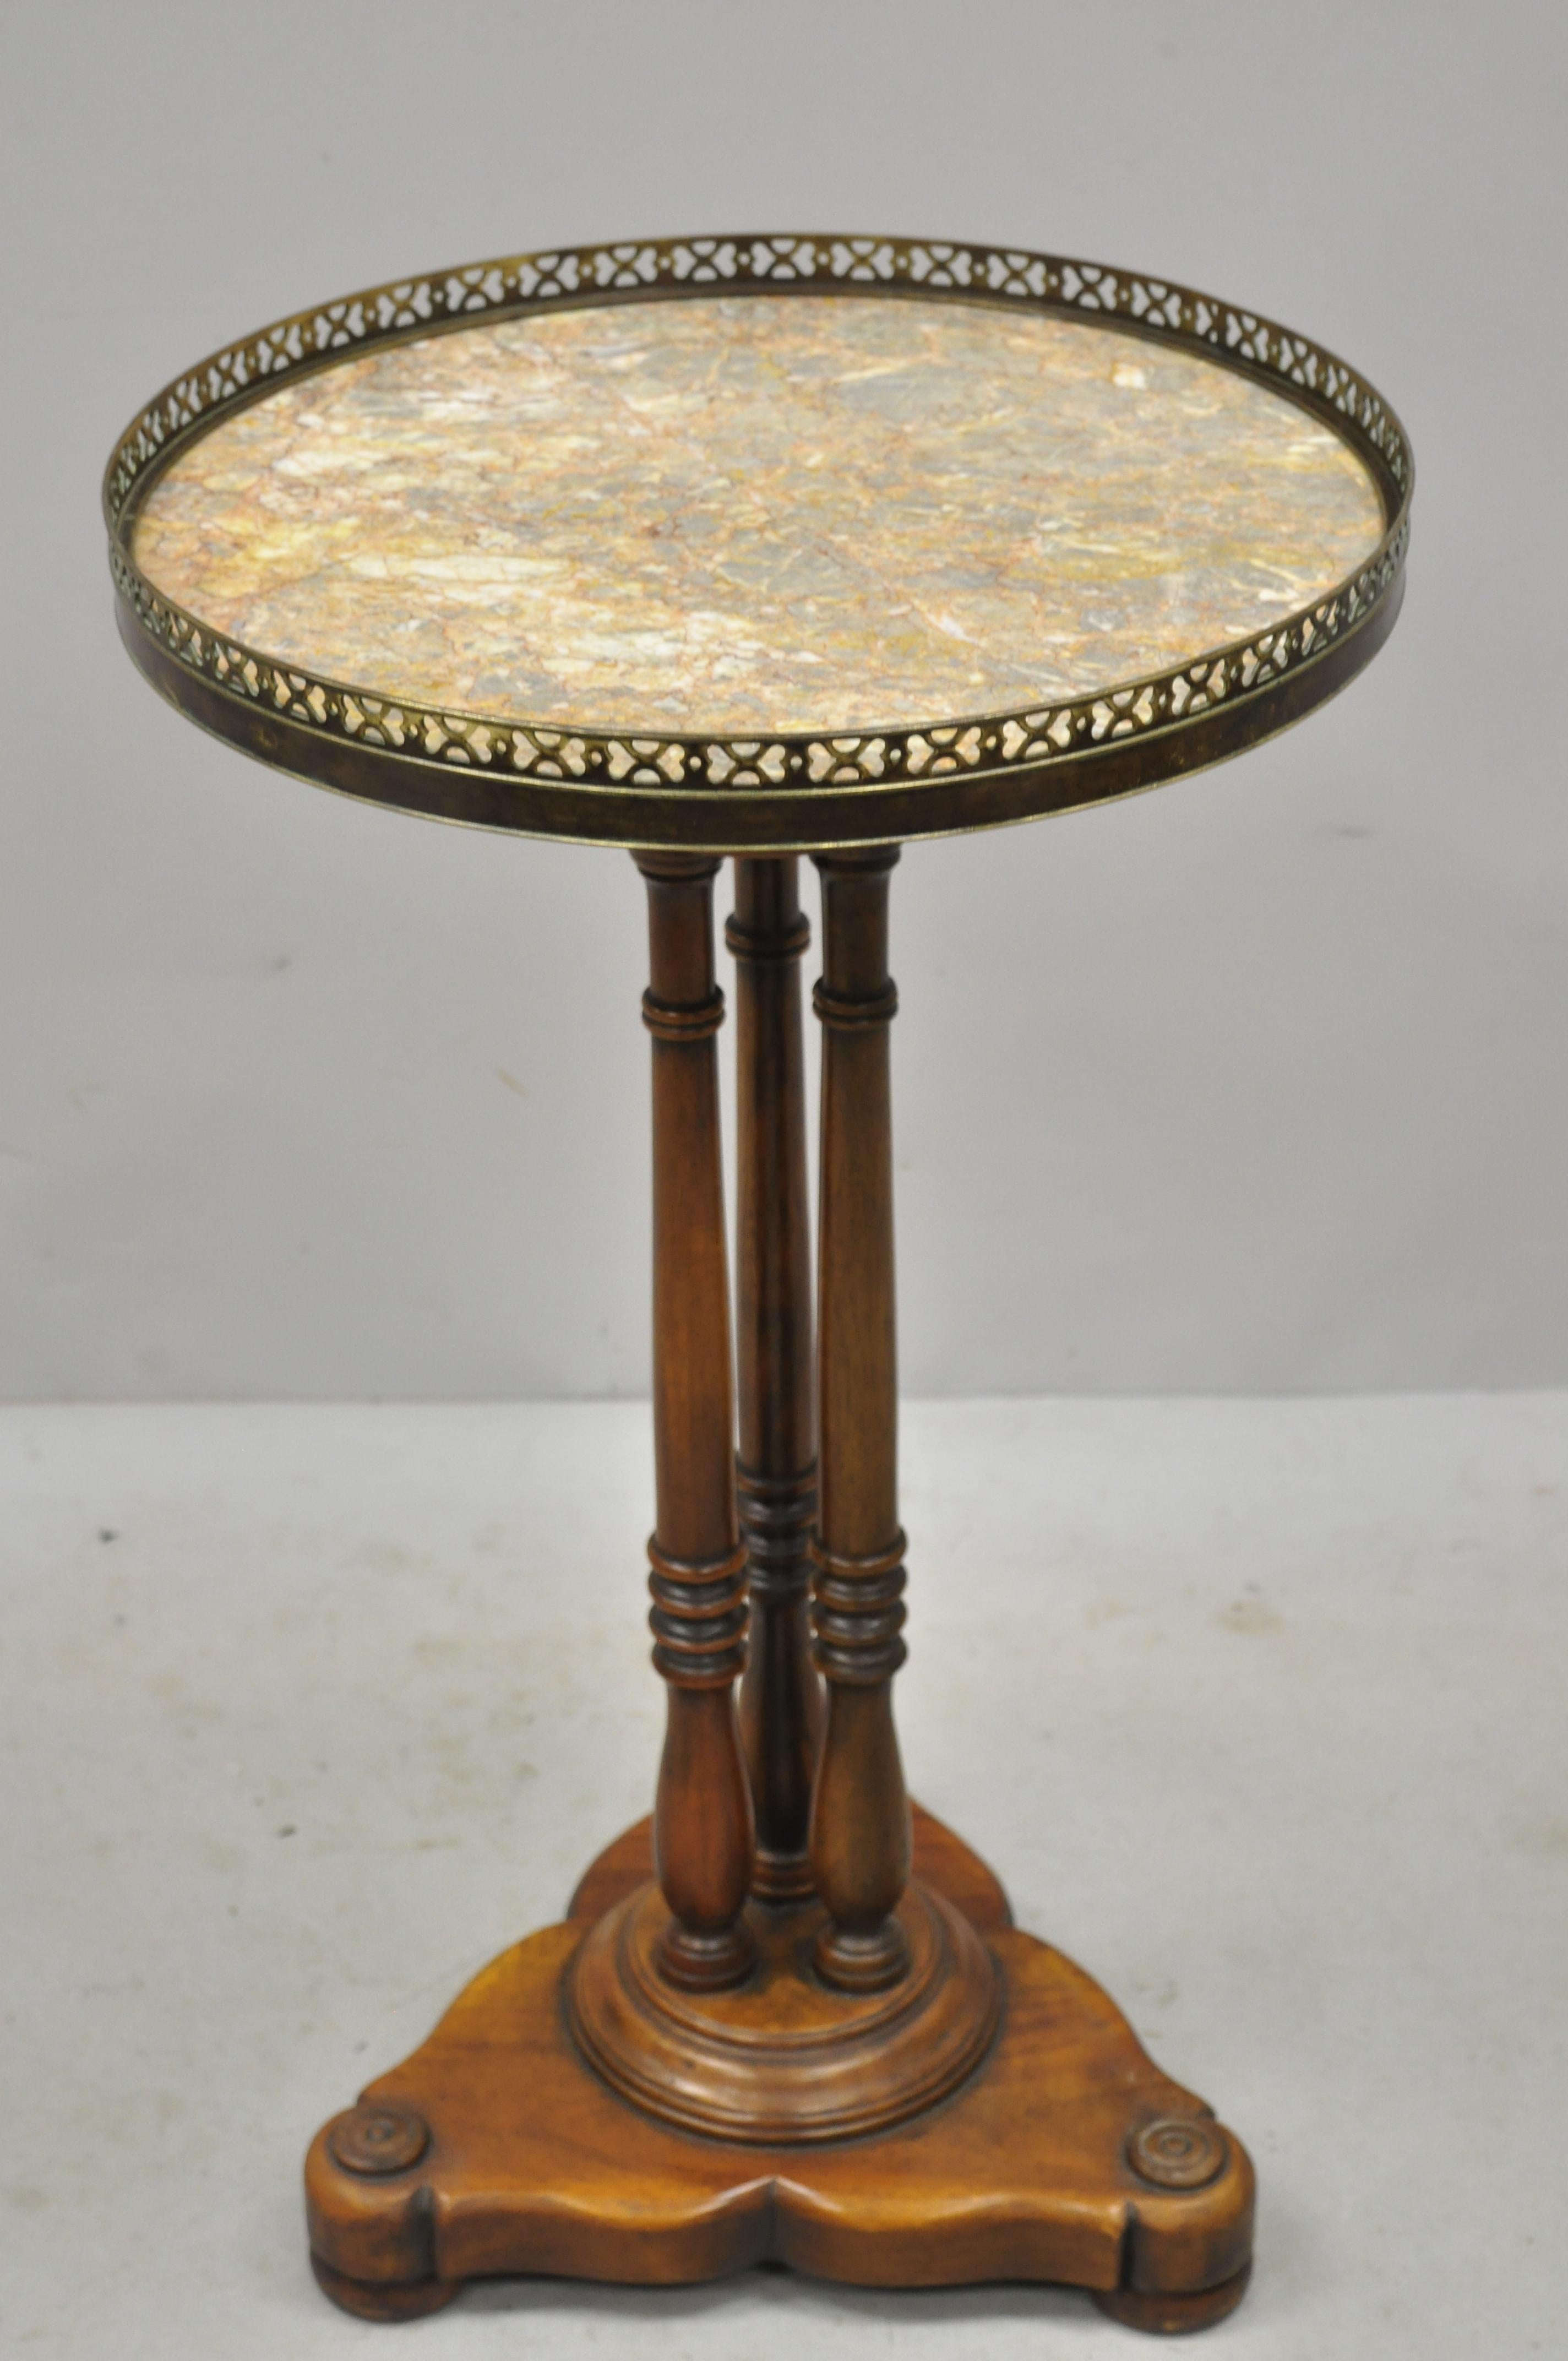 Theodore alexander marble-top French empire pedestal base accent side table. Listing includes an inset marble top, brass gallery, solid wood frame, beautiful wood grain, nicely carved details, original label, great style and form, circa late 20th